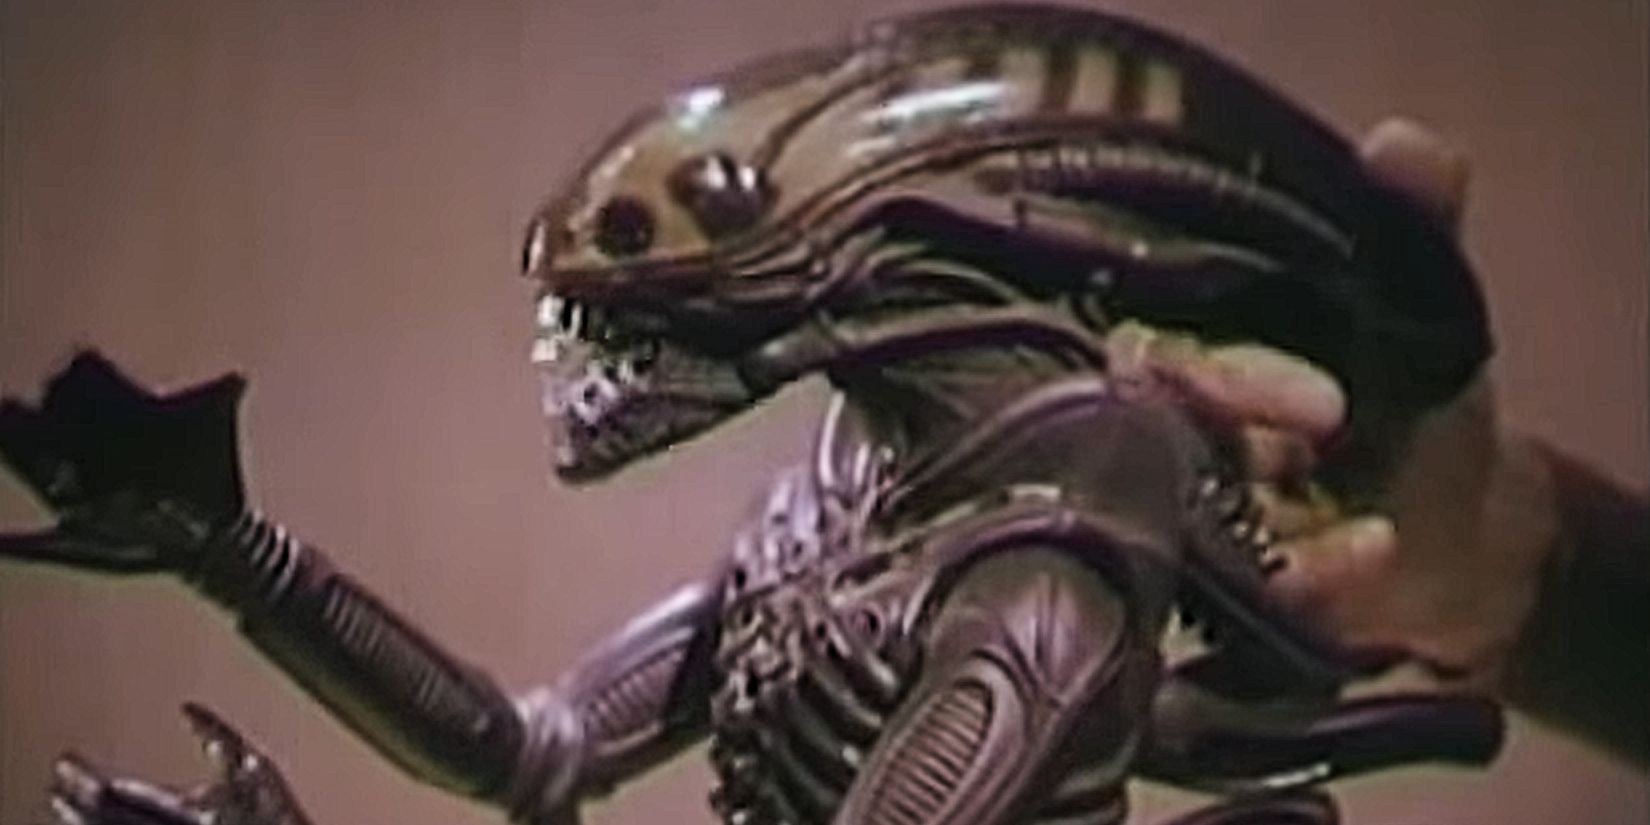 Real 1970s Alien Xenomorph Toy Commercial Is So Outdated It Feels Like A Parody